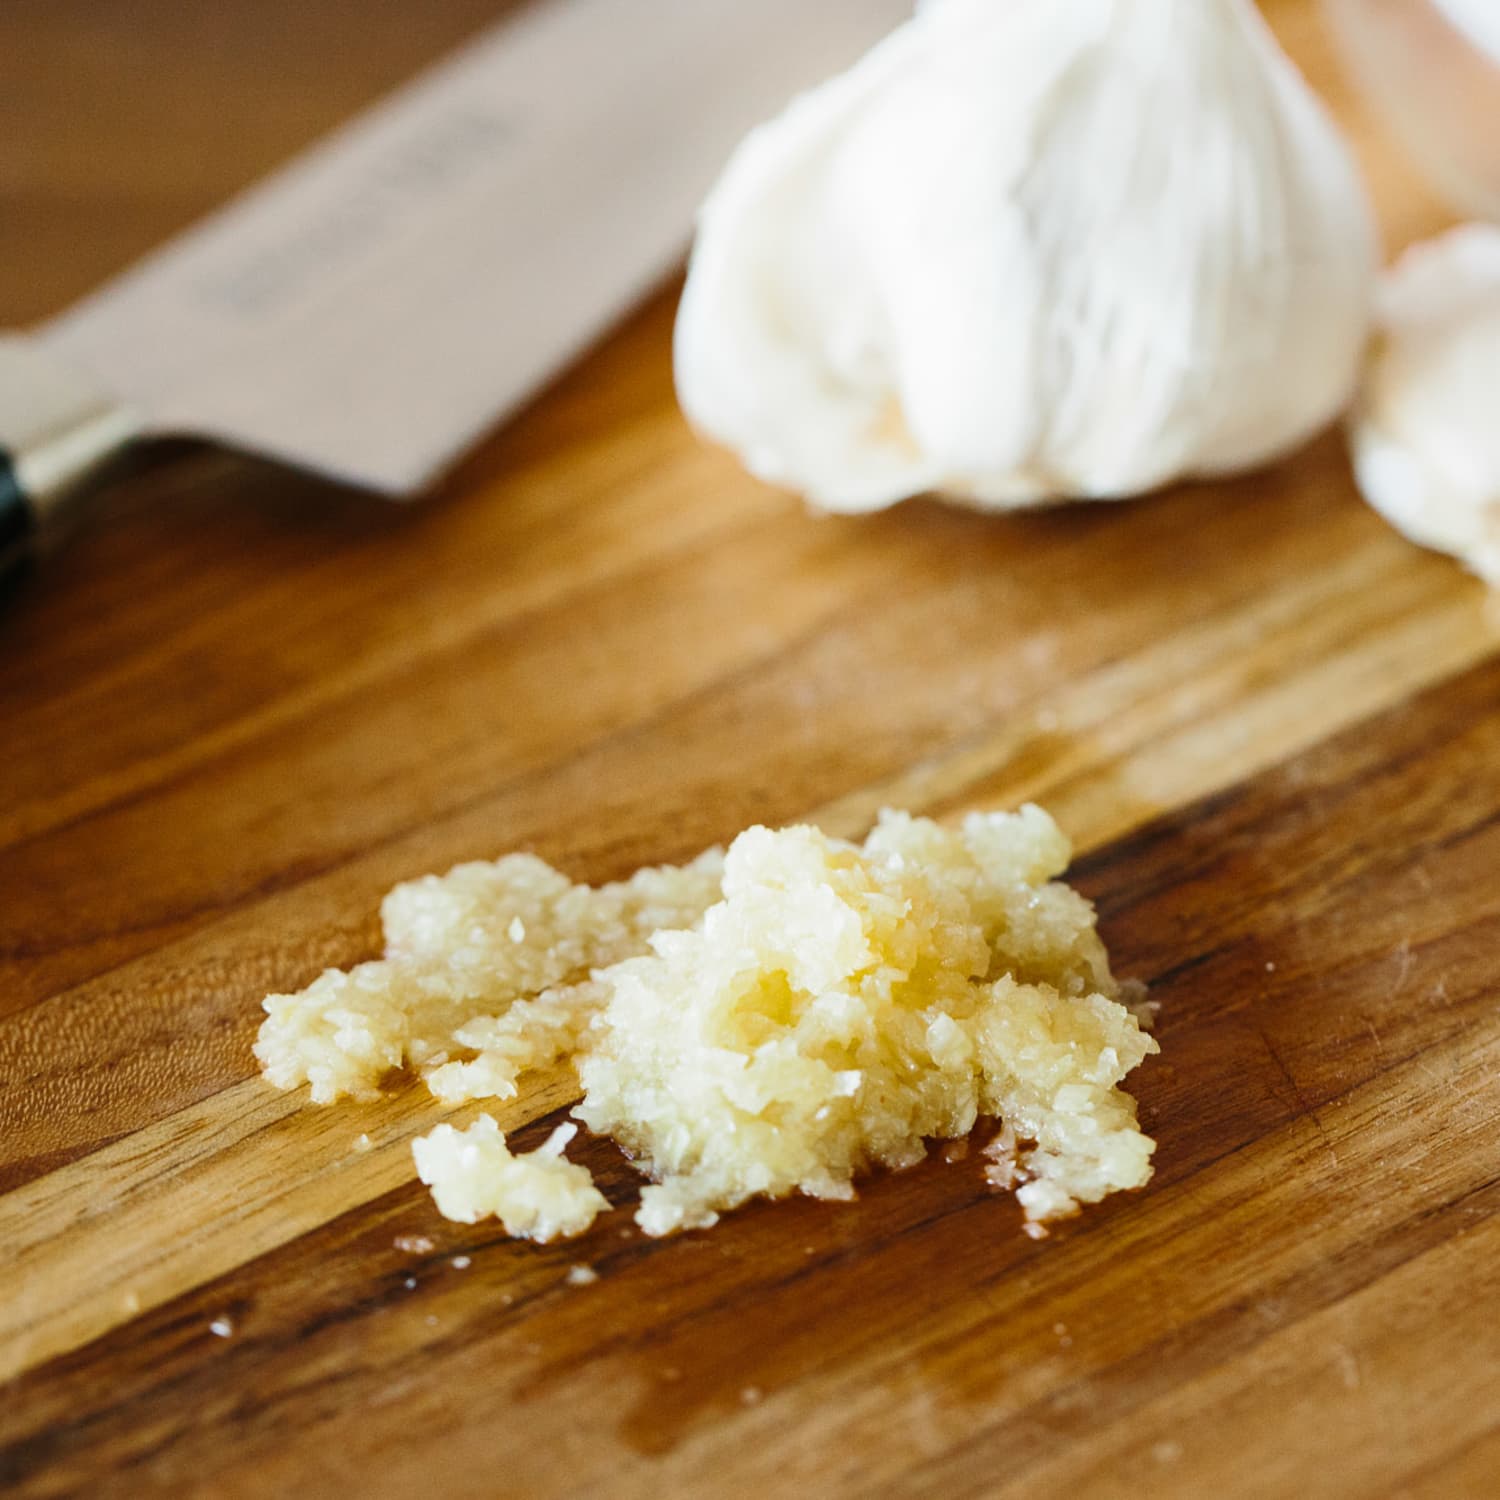 Try our easy to use Finely Crushed Garlic